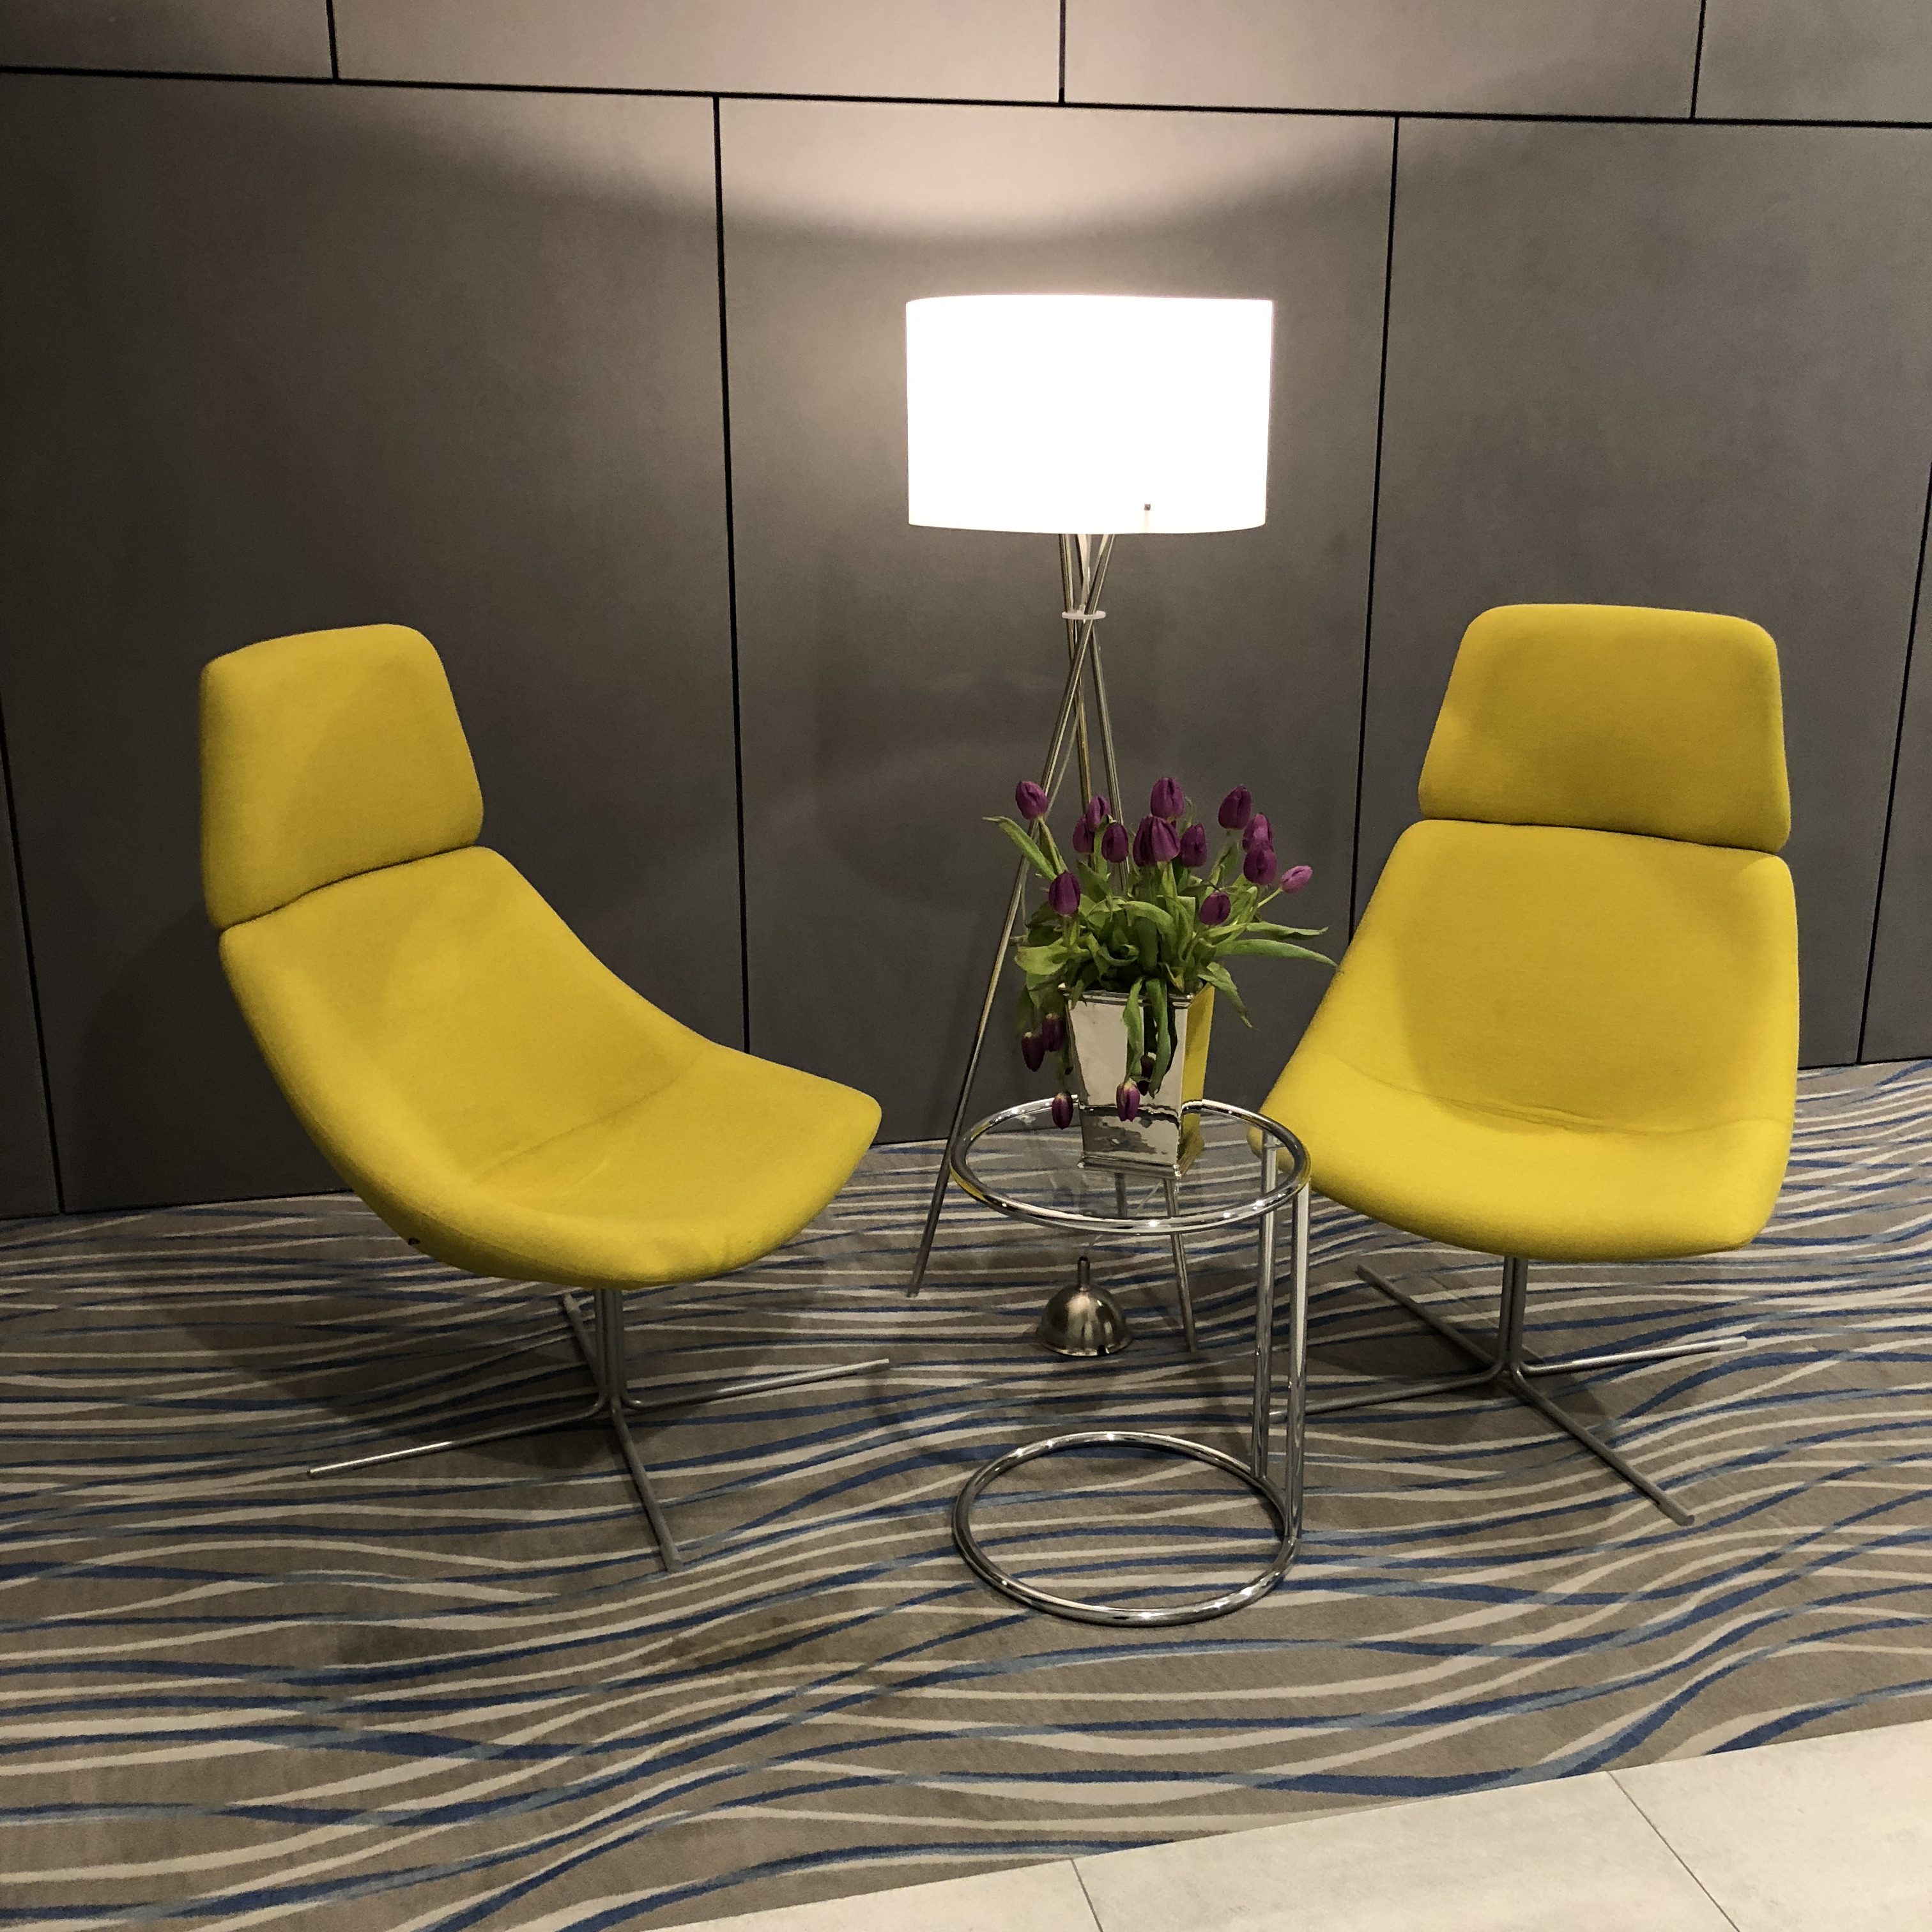 a yellow chairs next to a lamp